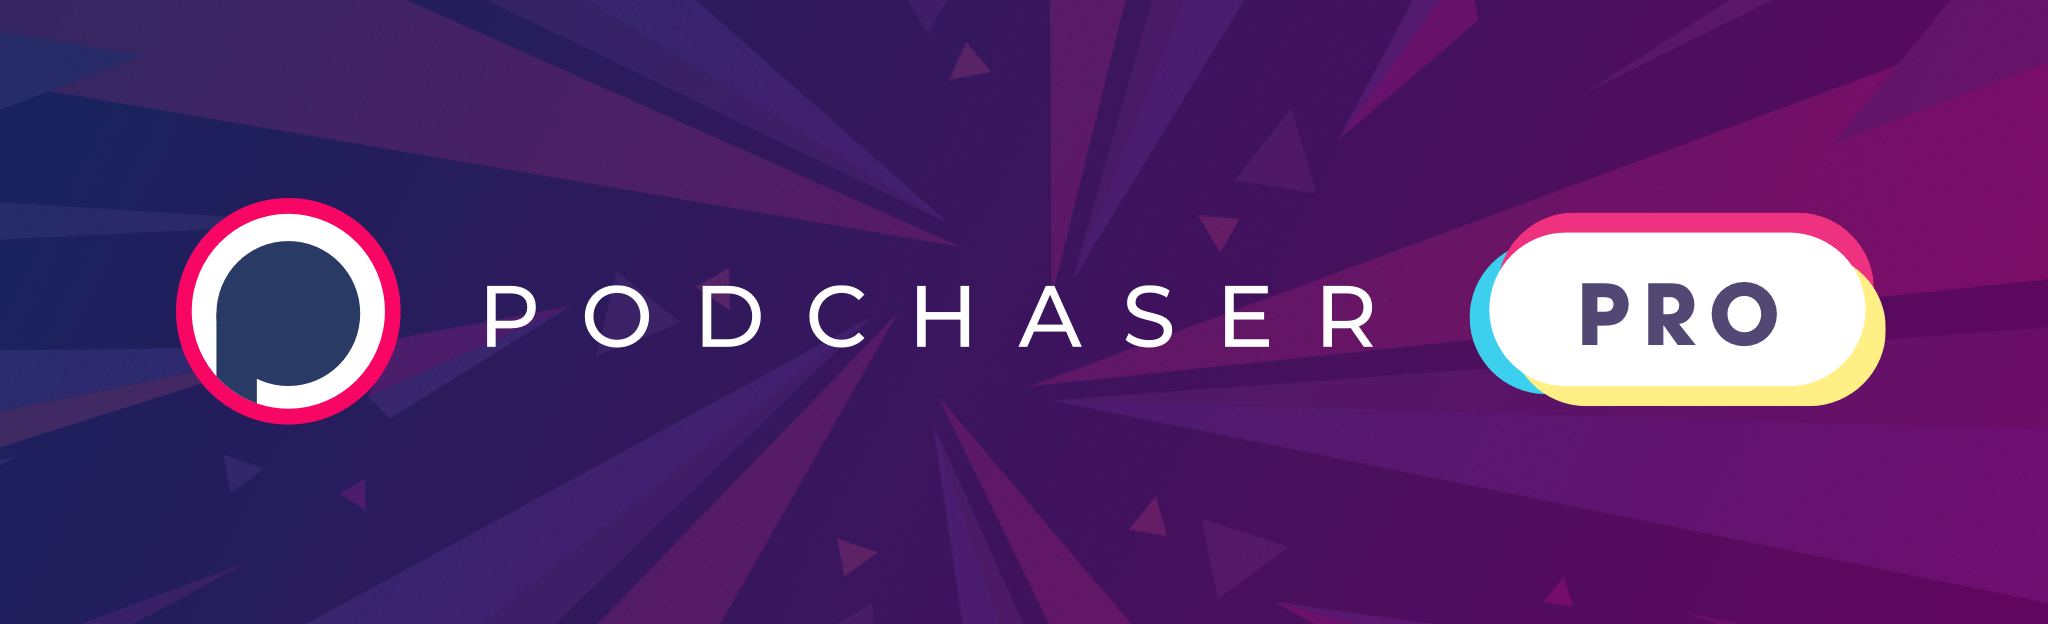 Podchaser Pro - reach, demographics, and contacts for podcasts